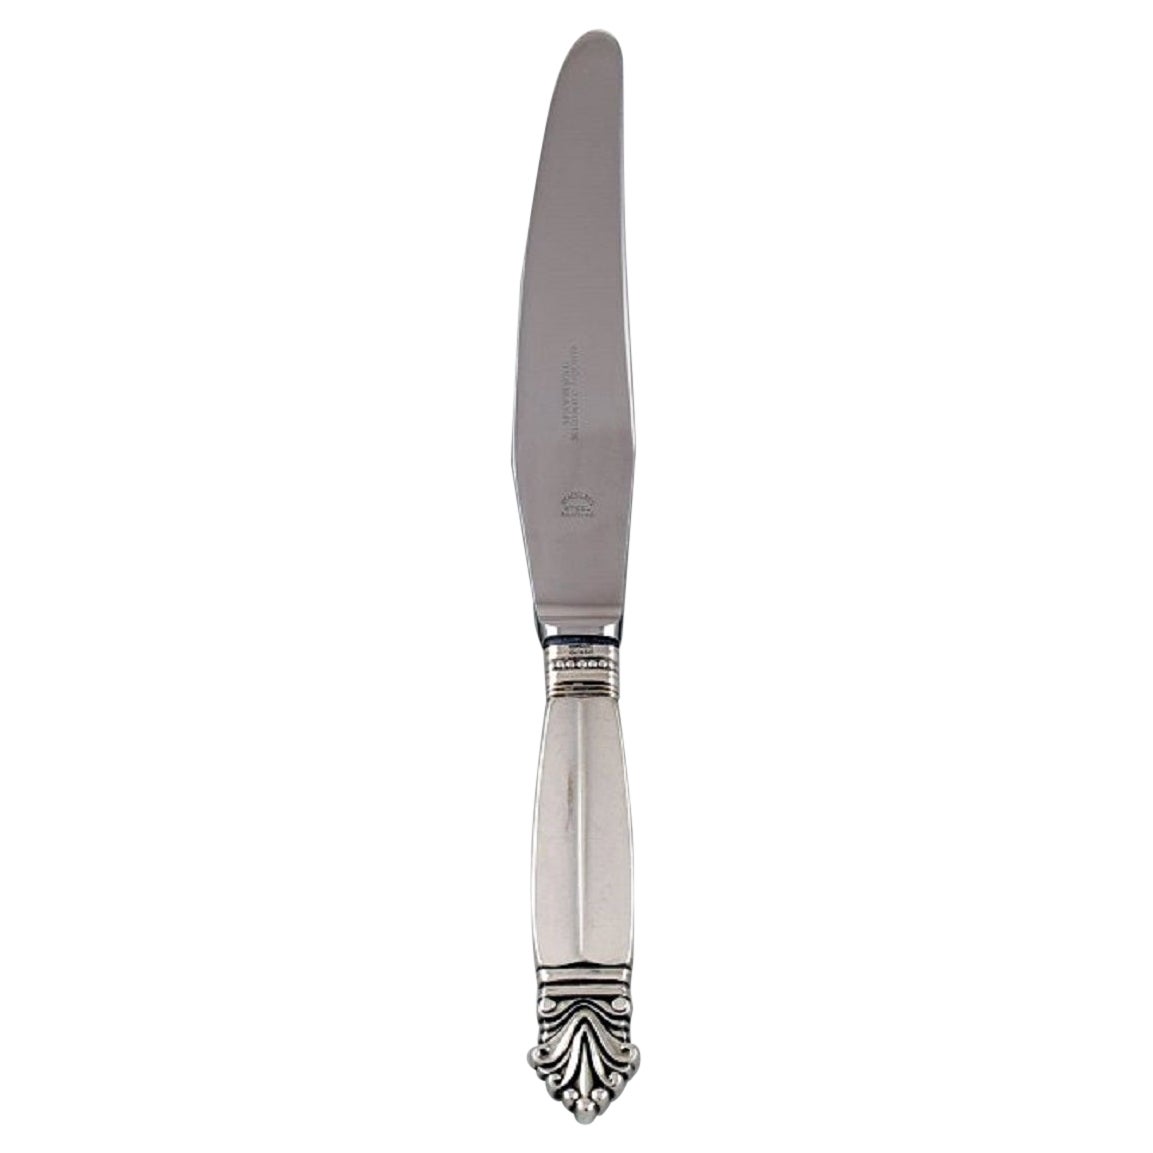 Georg Jensen Acanthus Dinner Knife in Sterling Silver and Stainless Steel